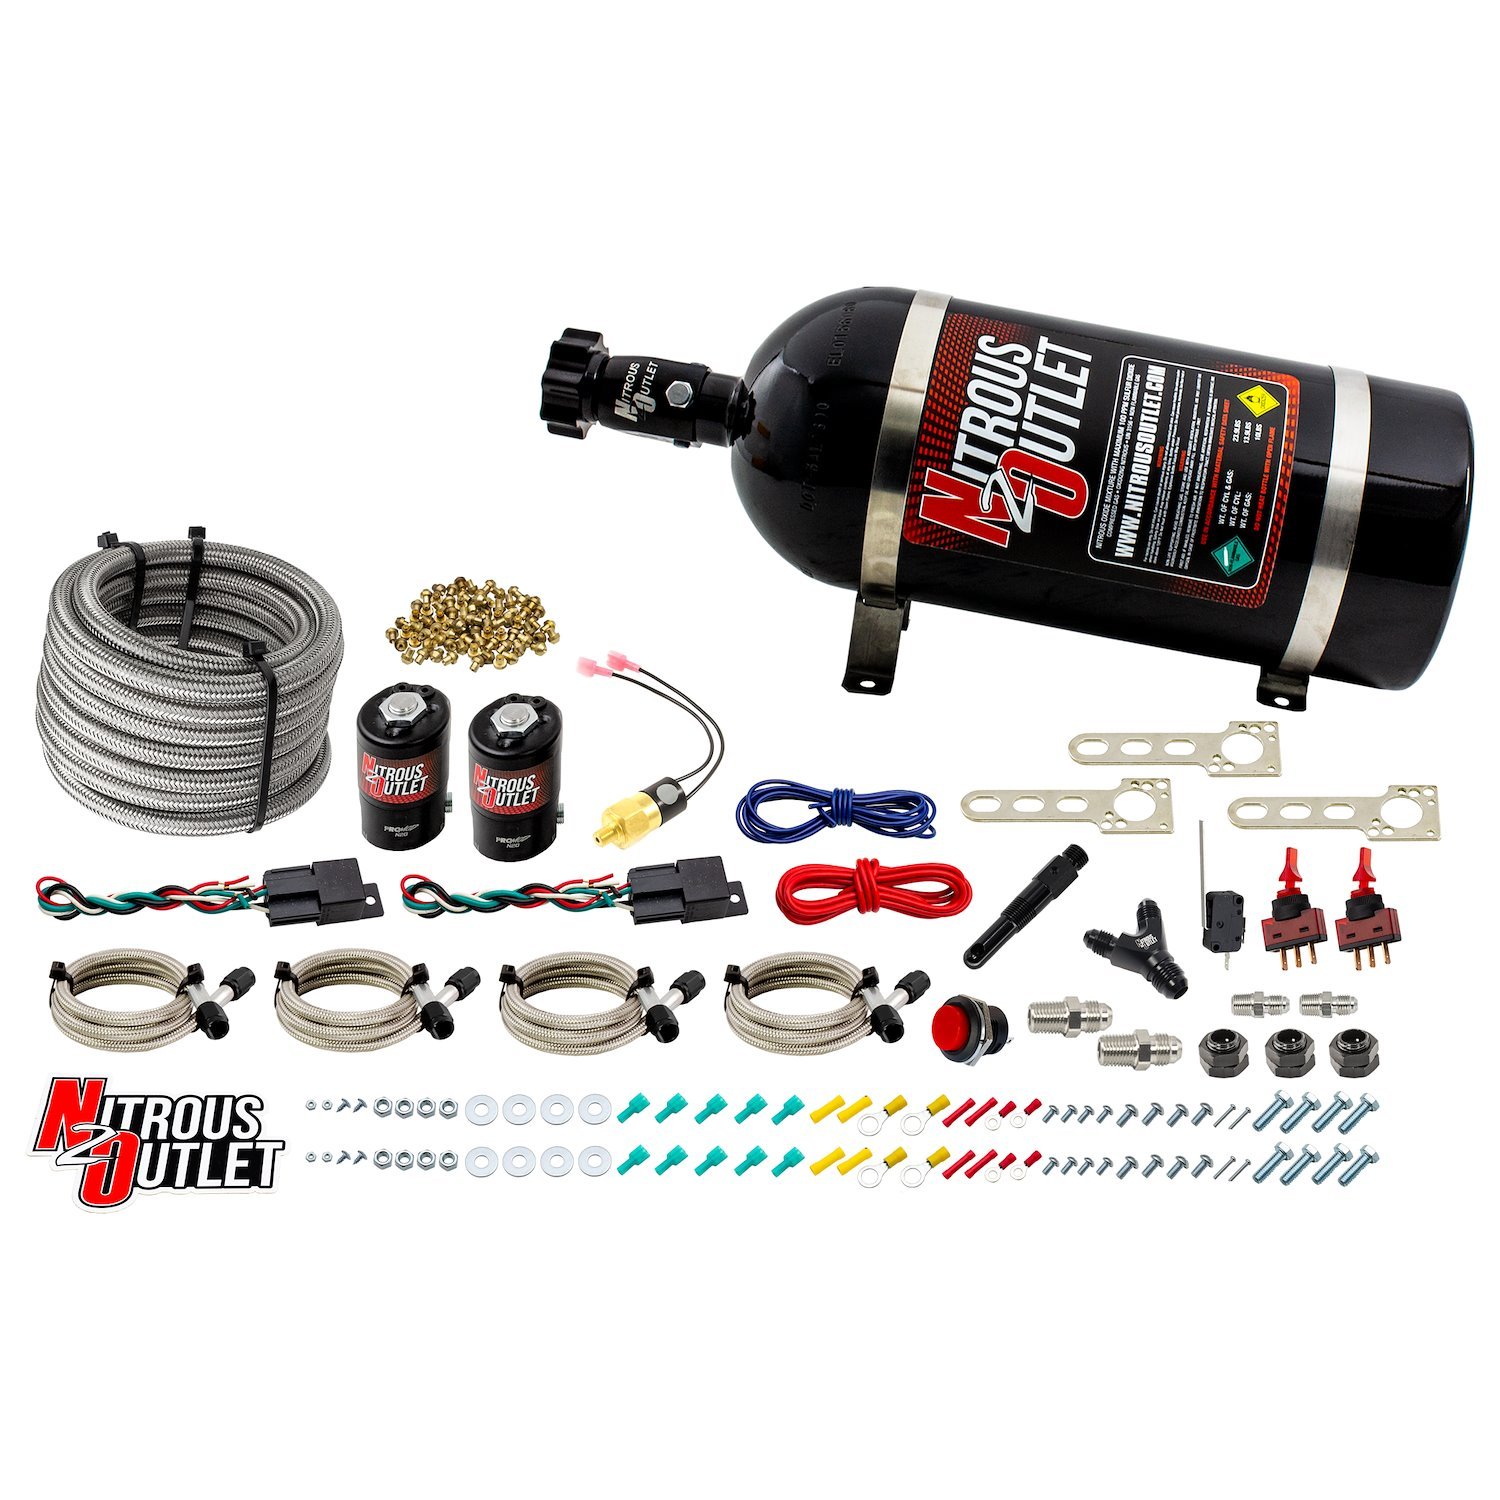 00-10251-10 Universal Diesel Dual-Stage Dry Single-Nozzle System, 35-200HP, 10lb Bottle